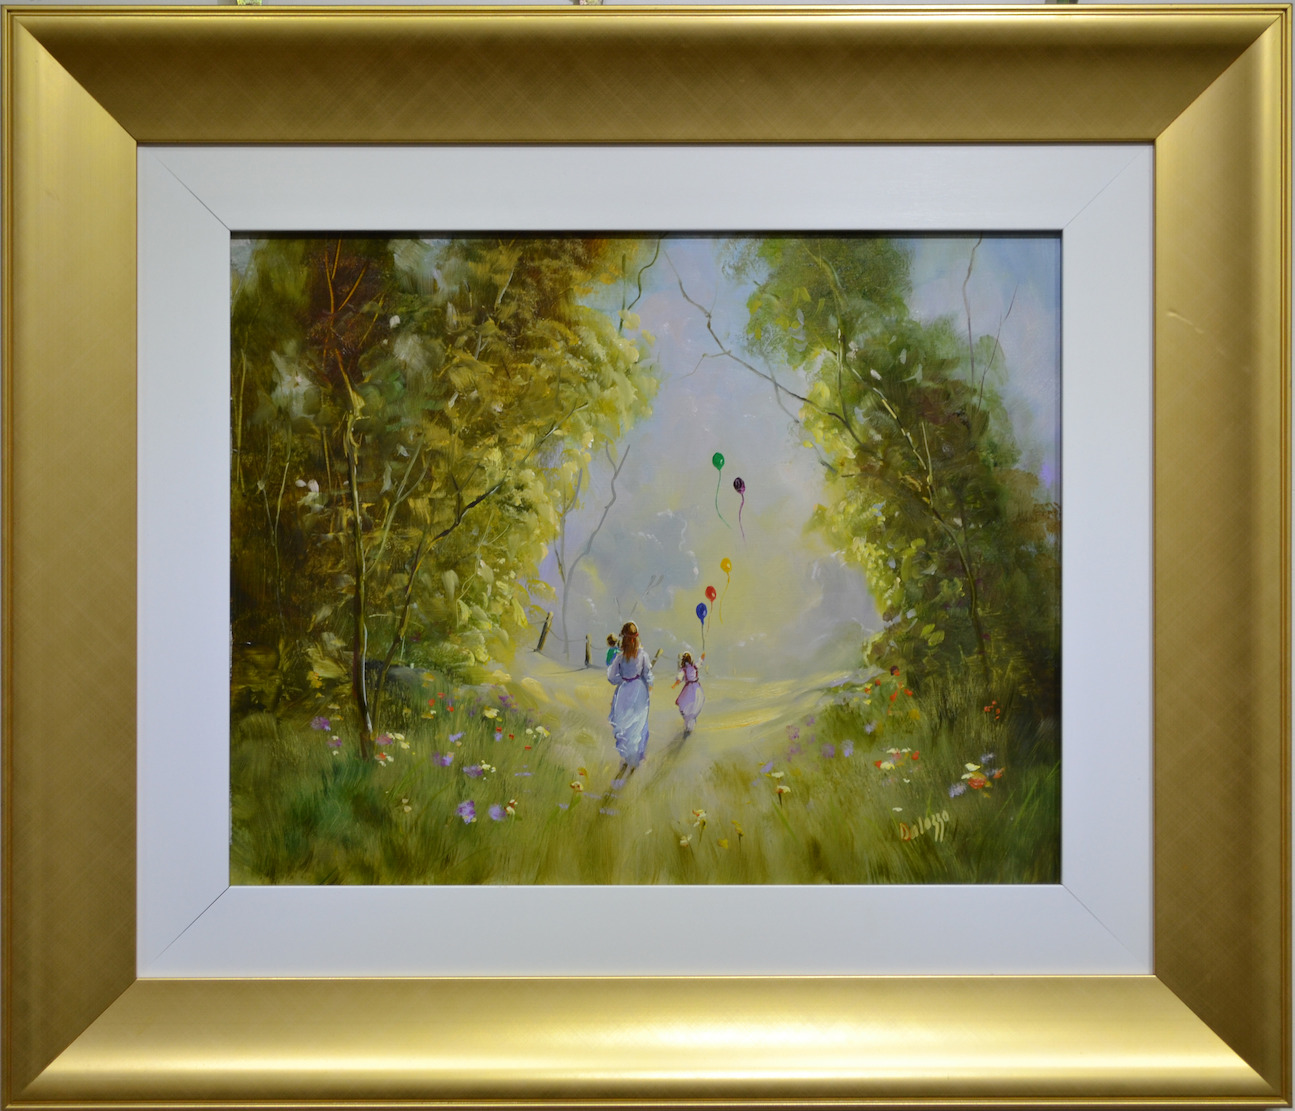 Framed Front View Of Romantic Painting "Up up and Away" By Lucette Dalozzo